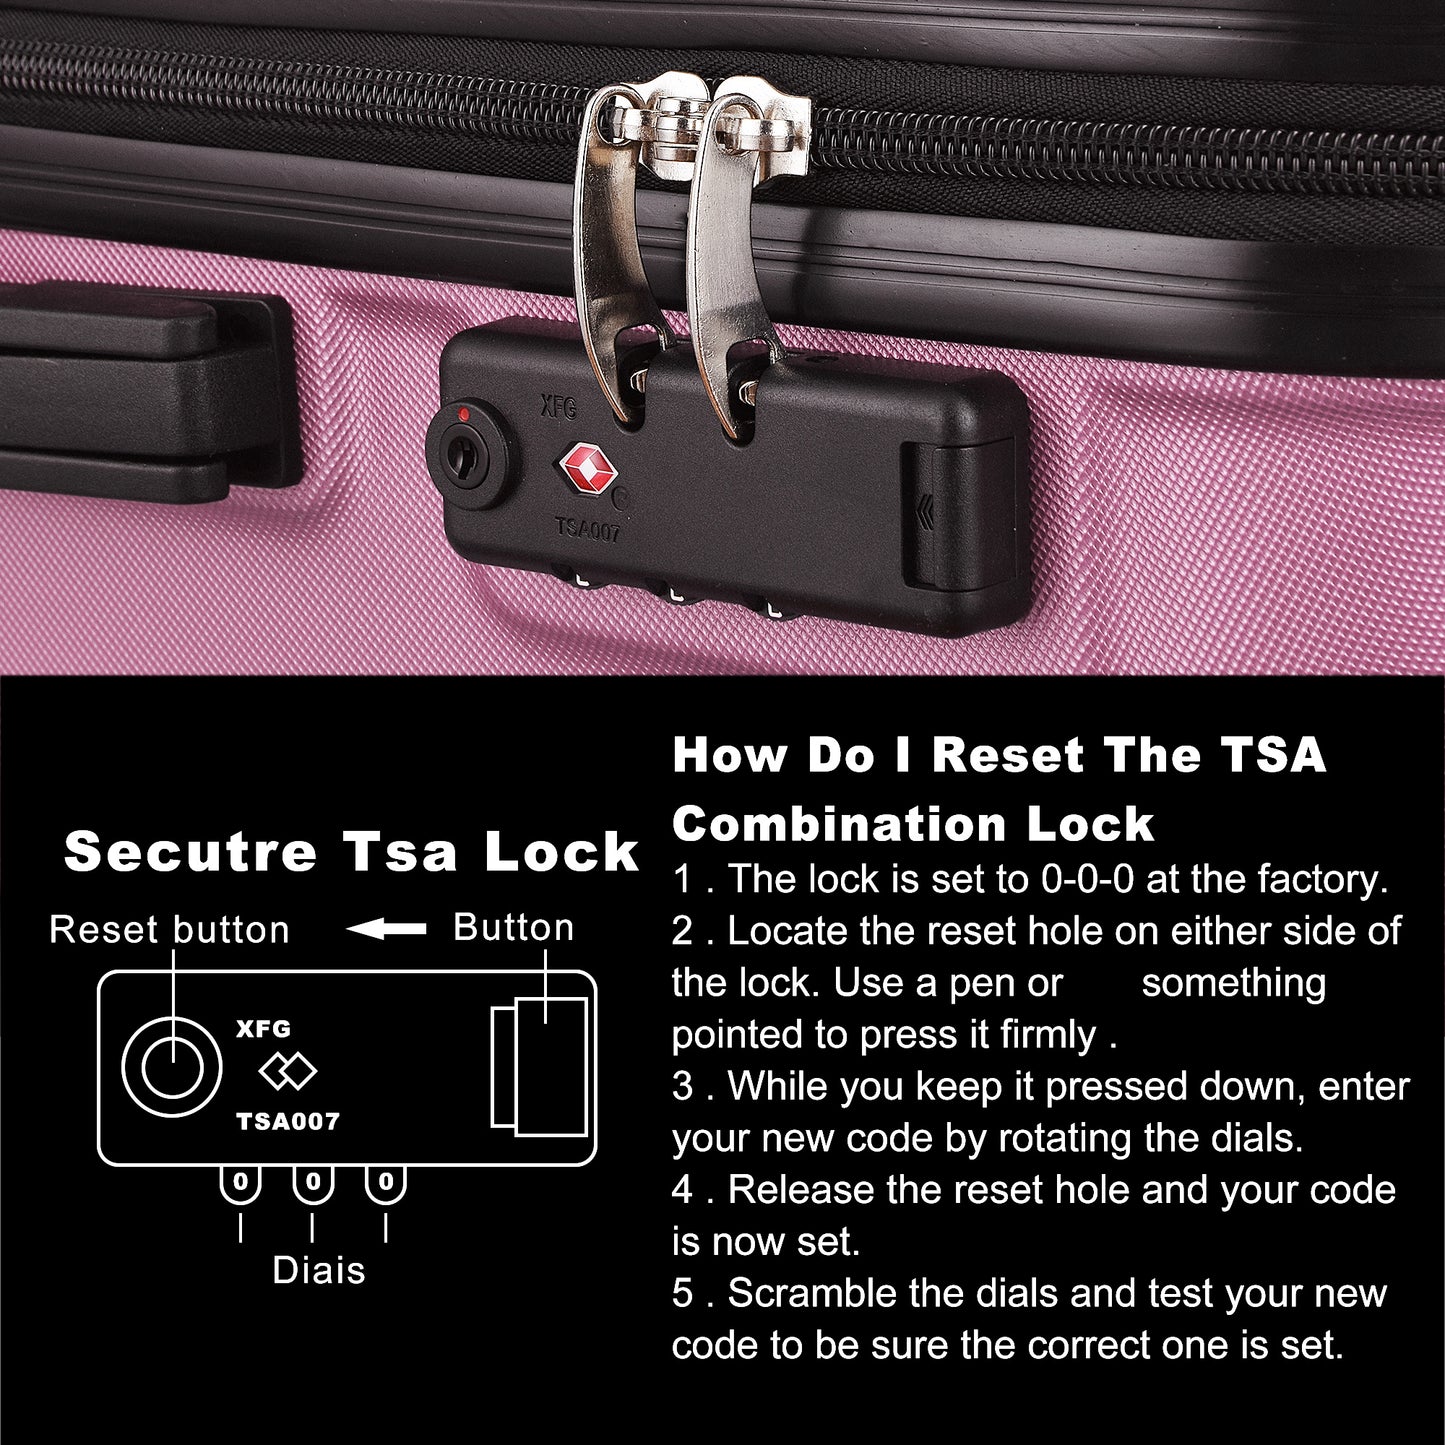 Luggage Sets Expandable ABS Hard shell 3pcs  with TSA Lock 20in/24in/28in